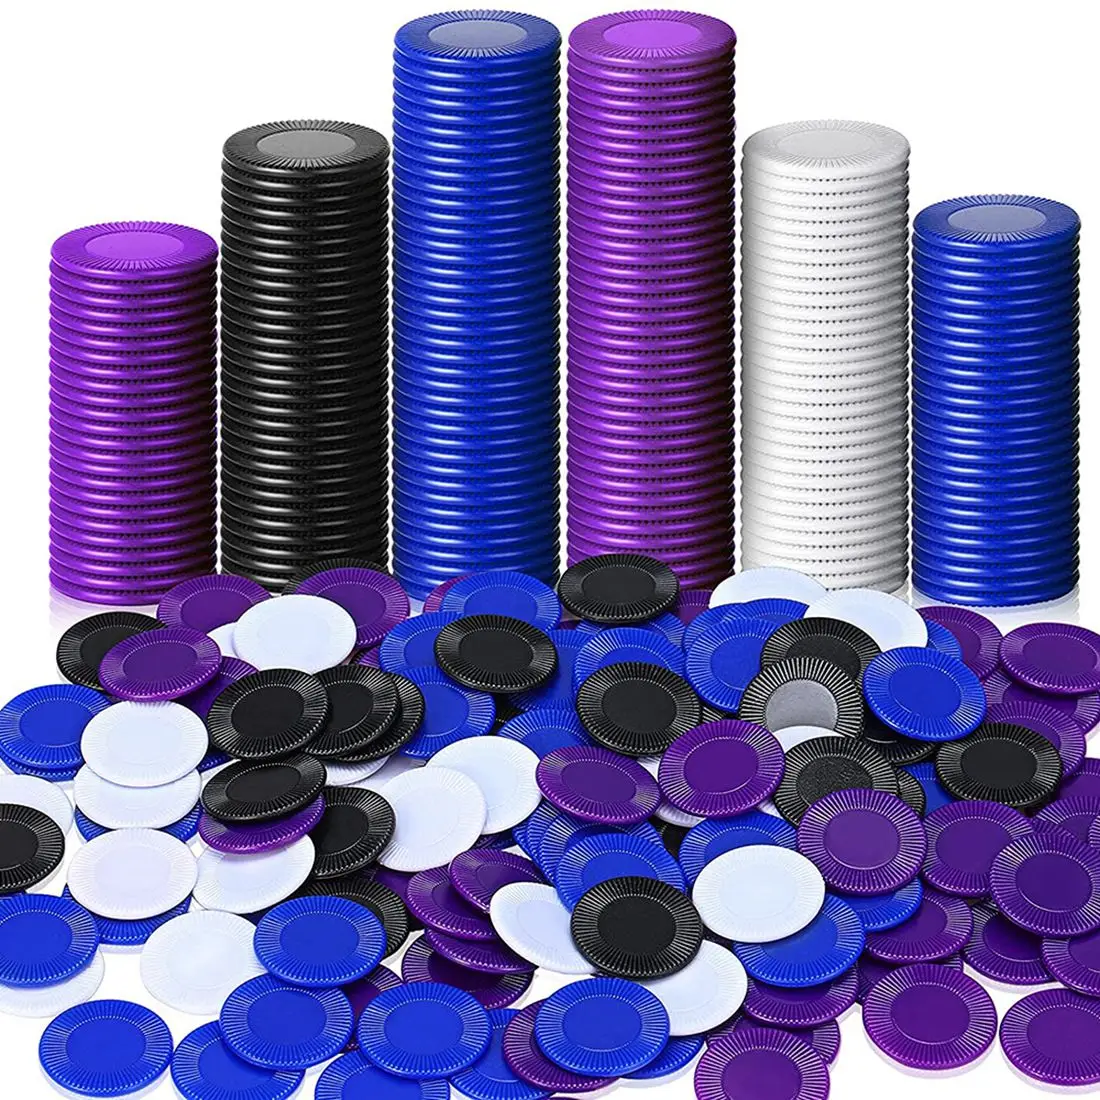 

400 Pieces Plastic Poker Chips Game Chips 4 Colors Counter Card for Game Playing Counting Bingo Game Chips Card, 2